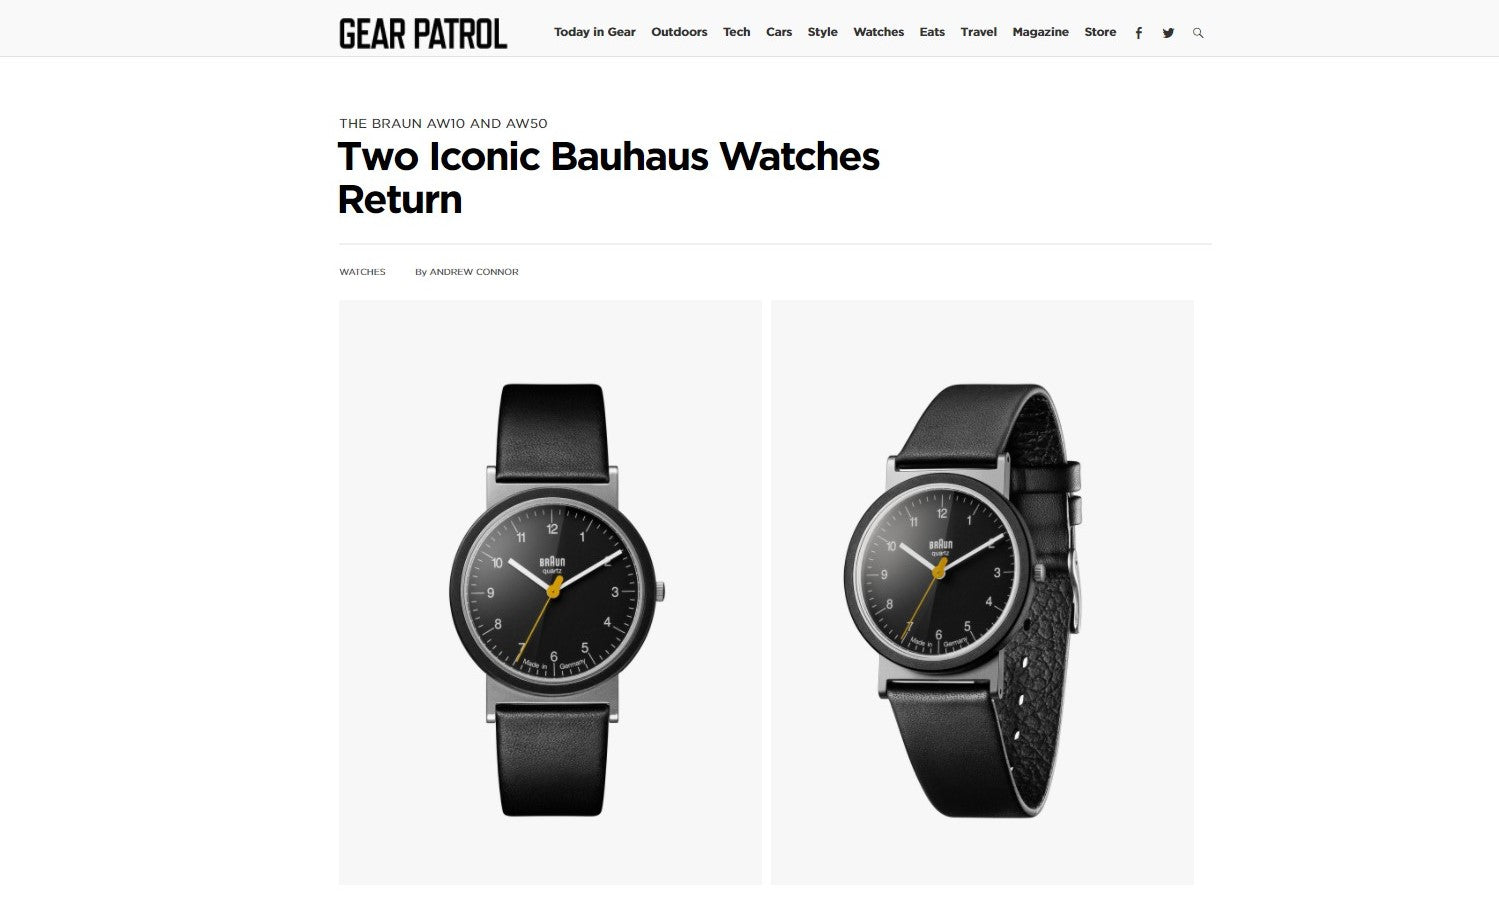 The Braun AW10 and AW50 Two Iconic Bauhaus Watches Return